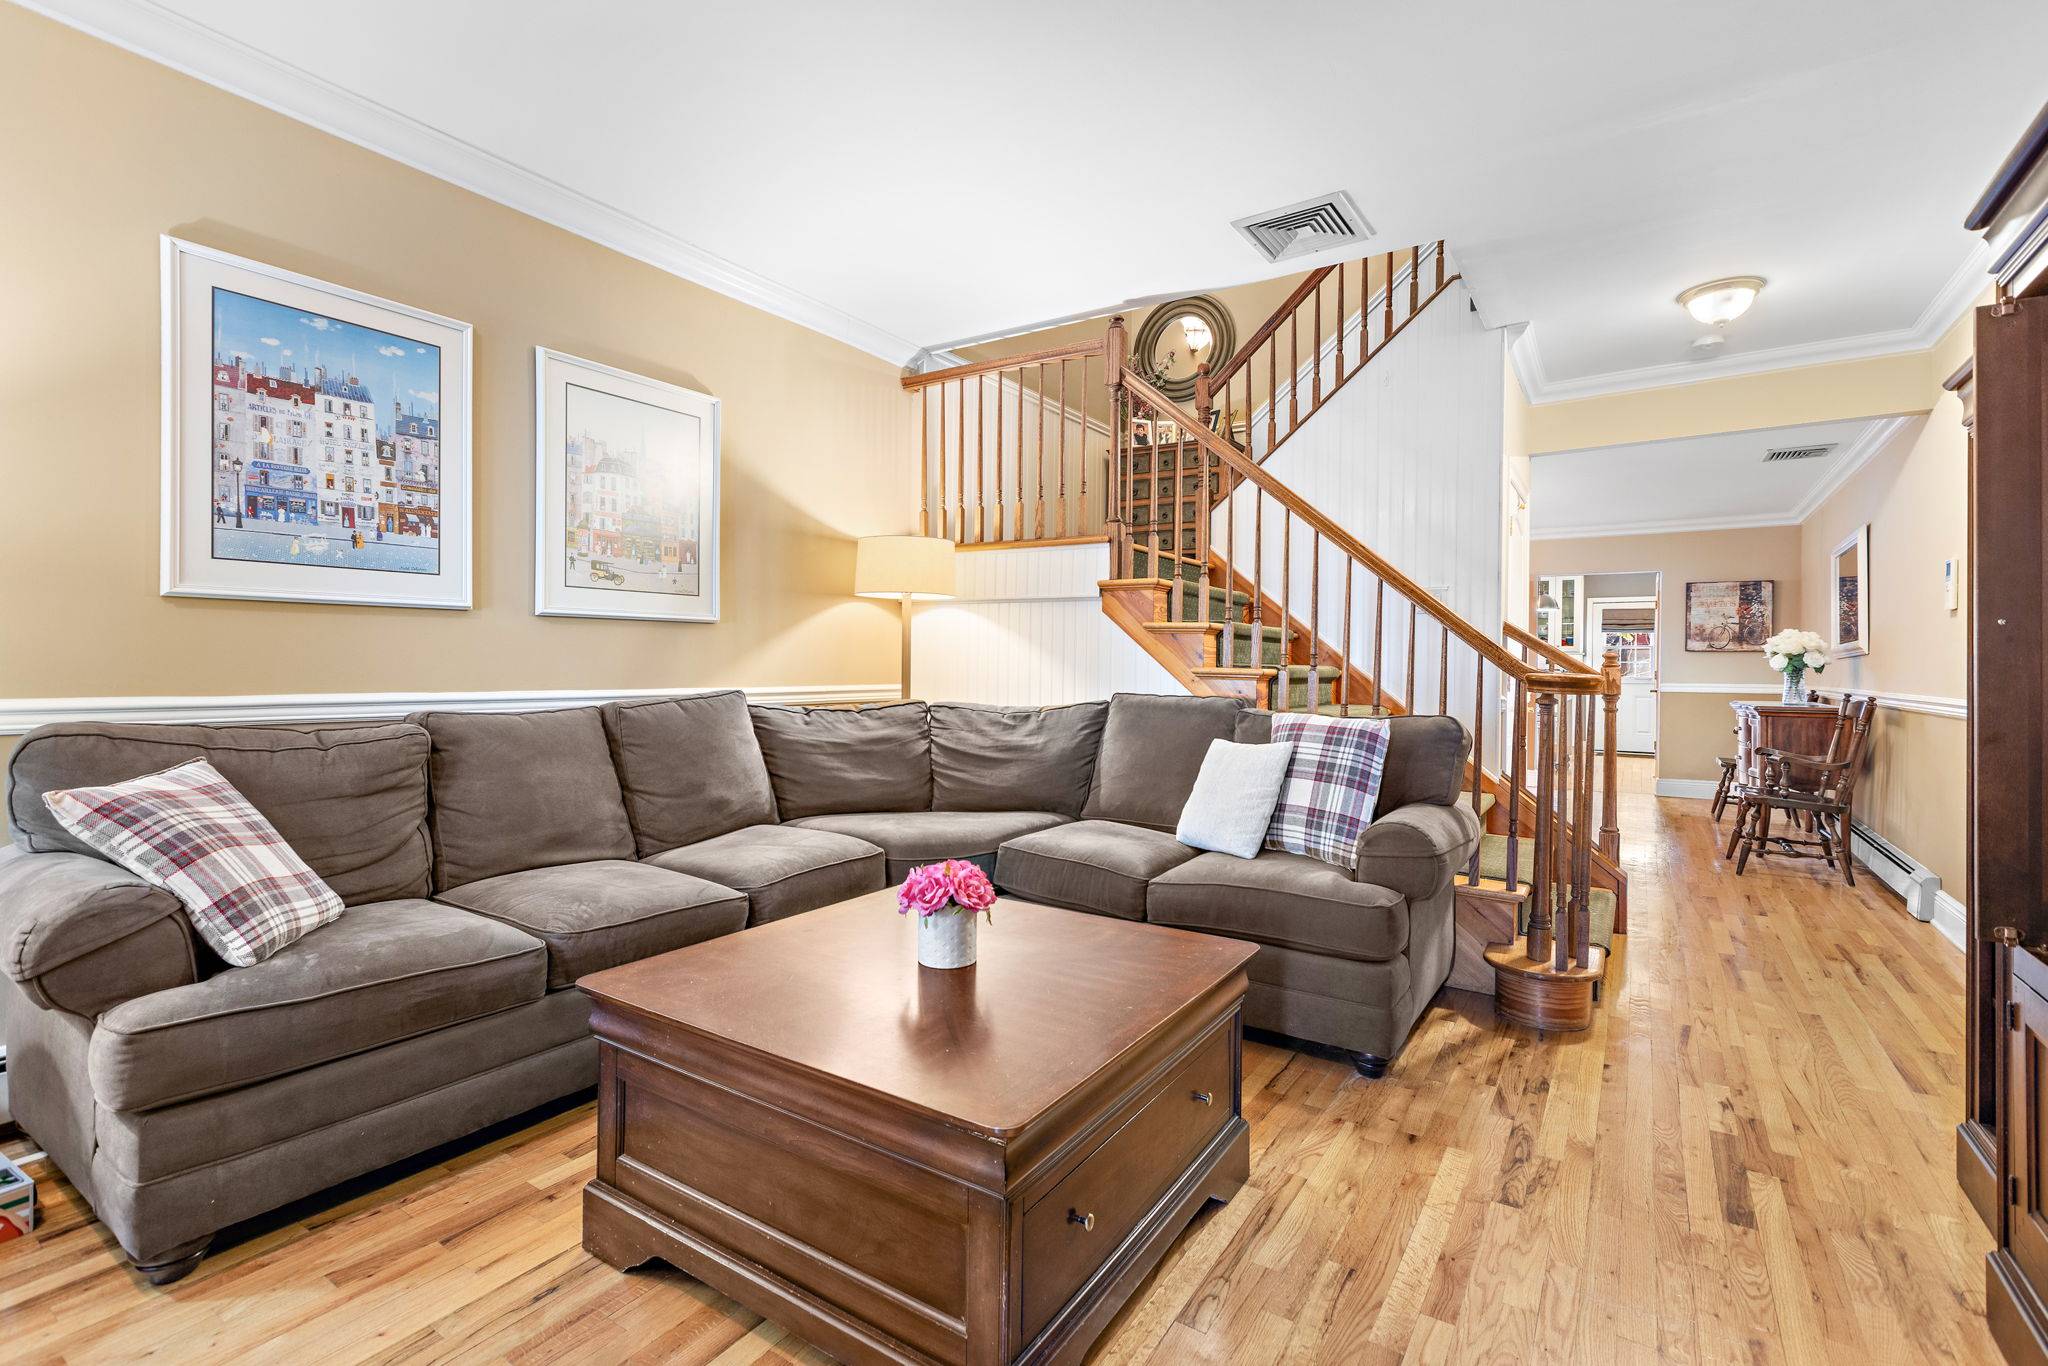 Pristine One Family Home In The Heart Of Hoboken!